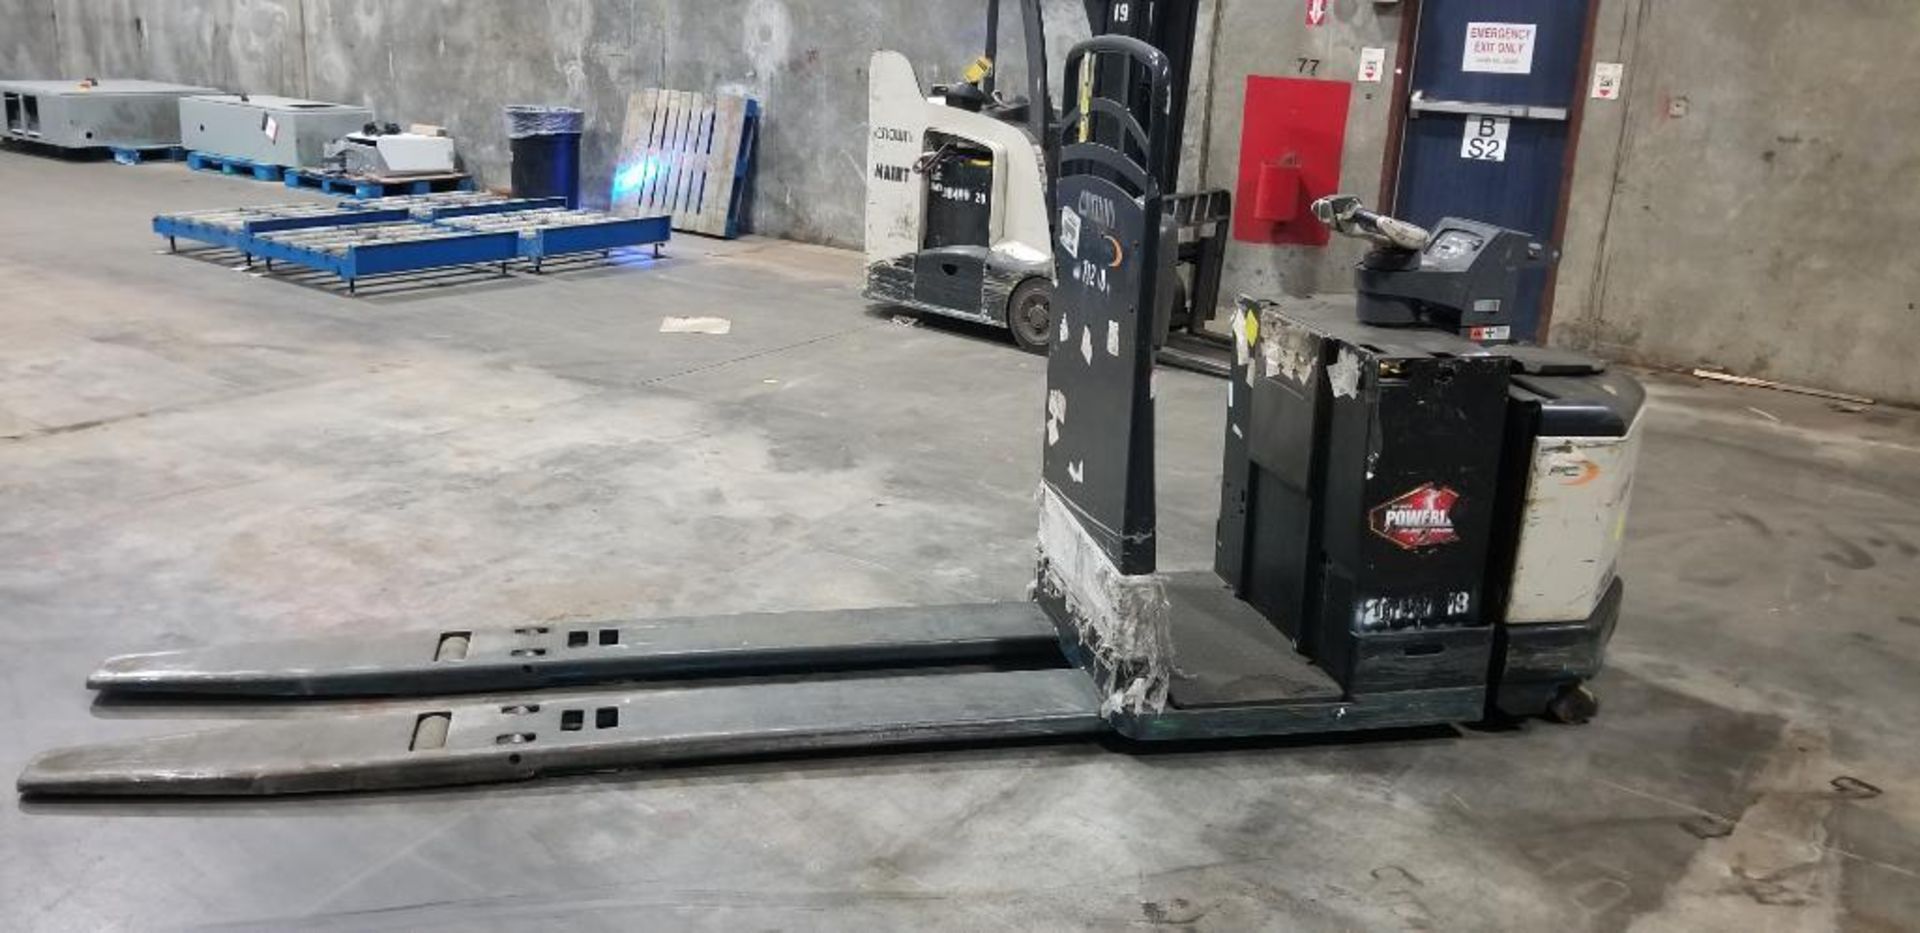 2018 Crown PC 4500 Series End Control Double Pallet Truck, Model PC4500-80, S/N 10076742, 8,000 LB. - Image 3 of 6